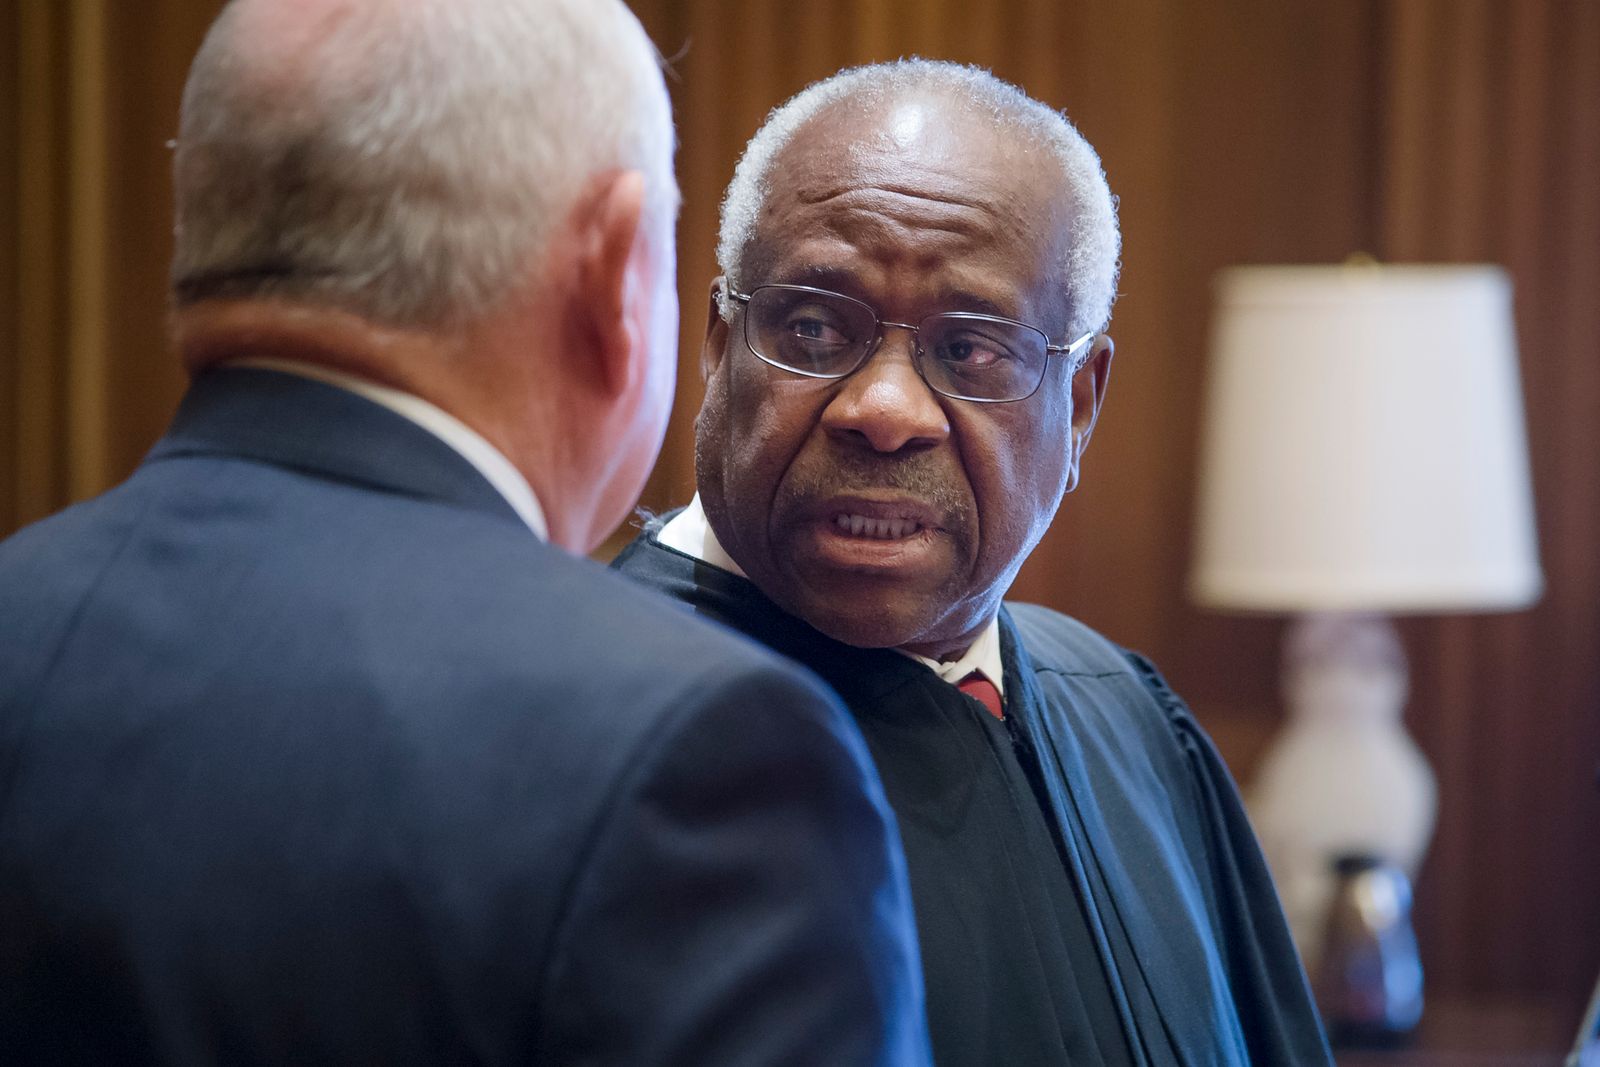 Clarence Thomas (right) swears in Sonny Perdue as the 31st Secretary of Agriculture. Photo by Preston Keres